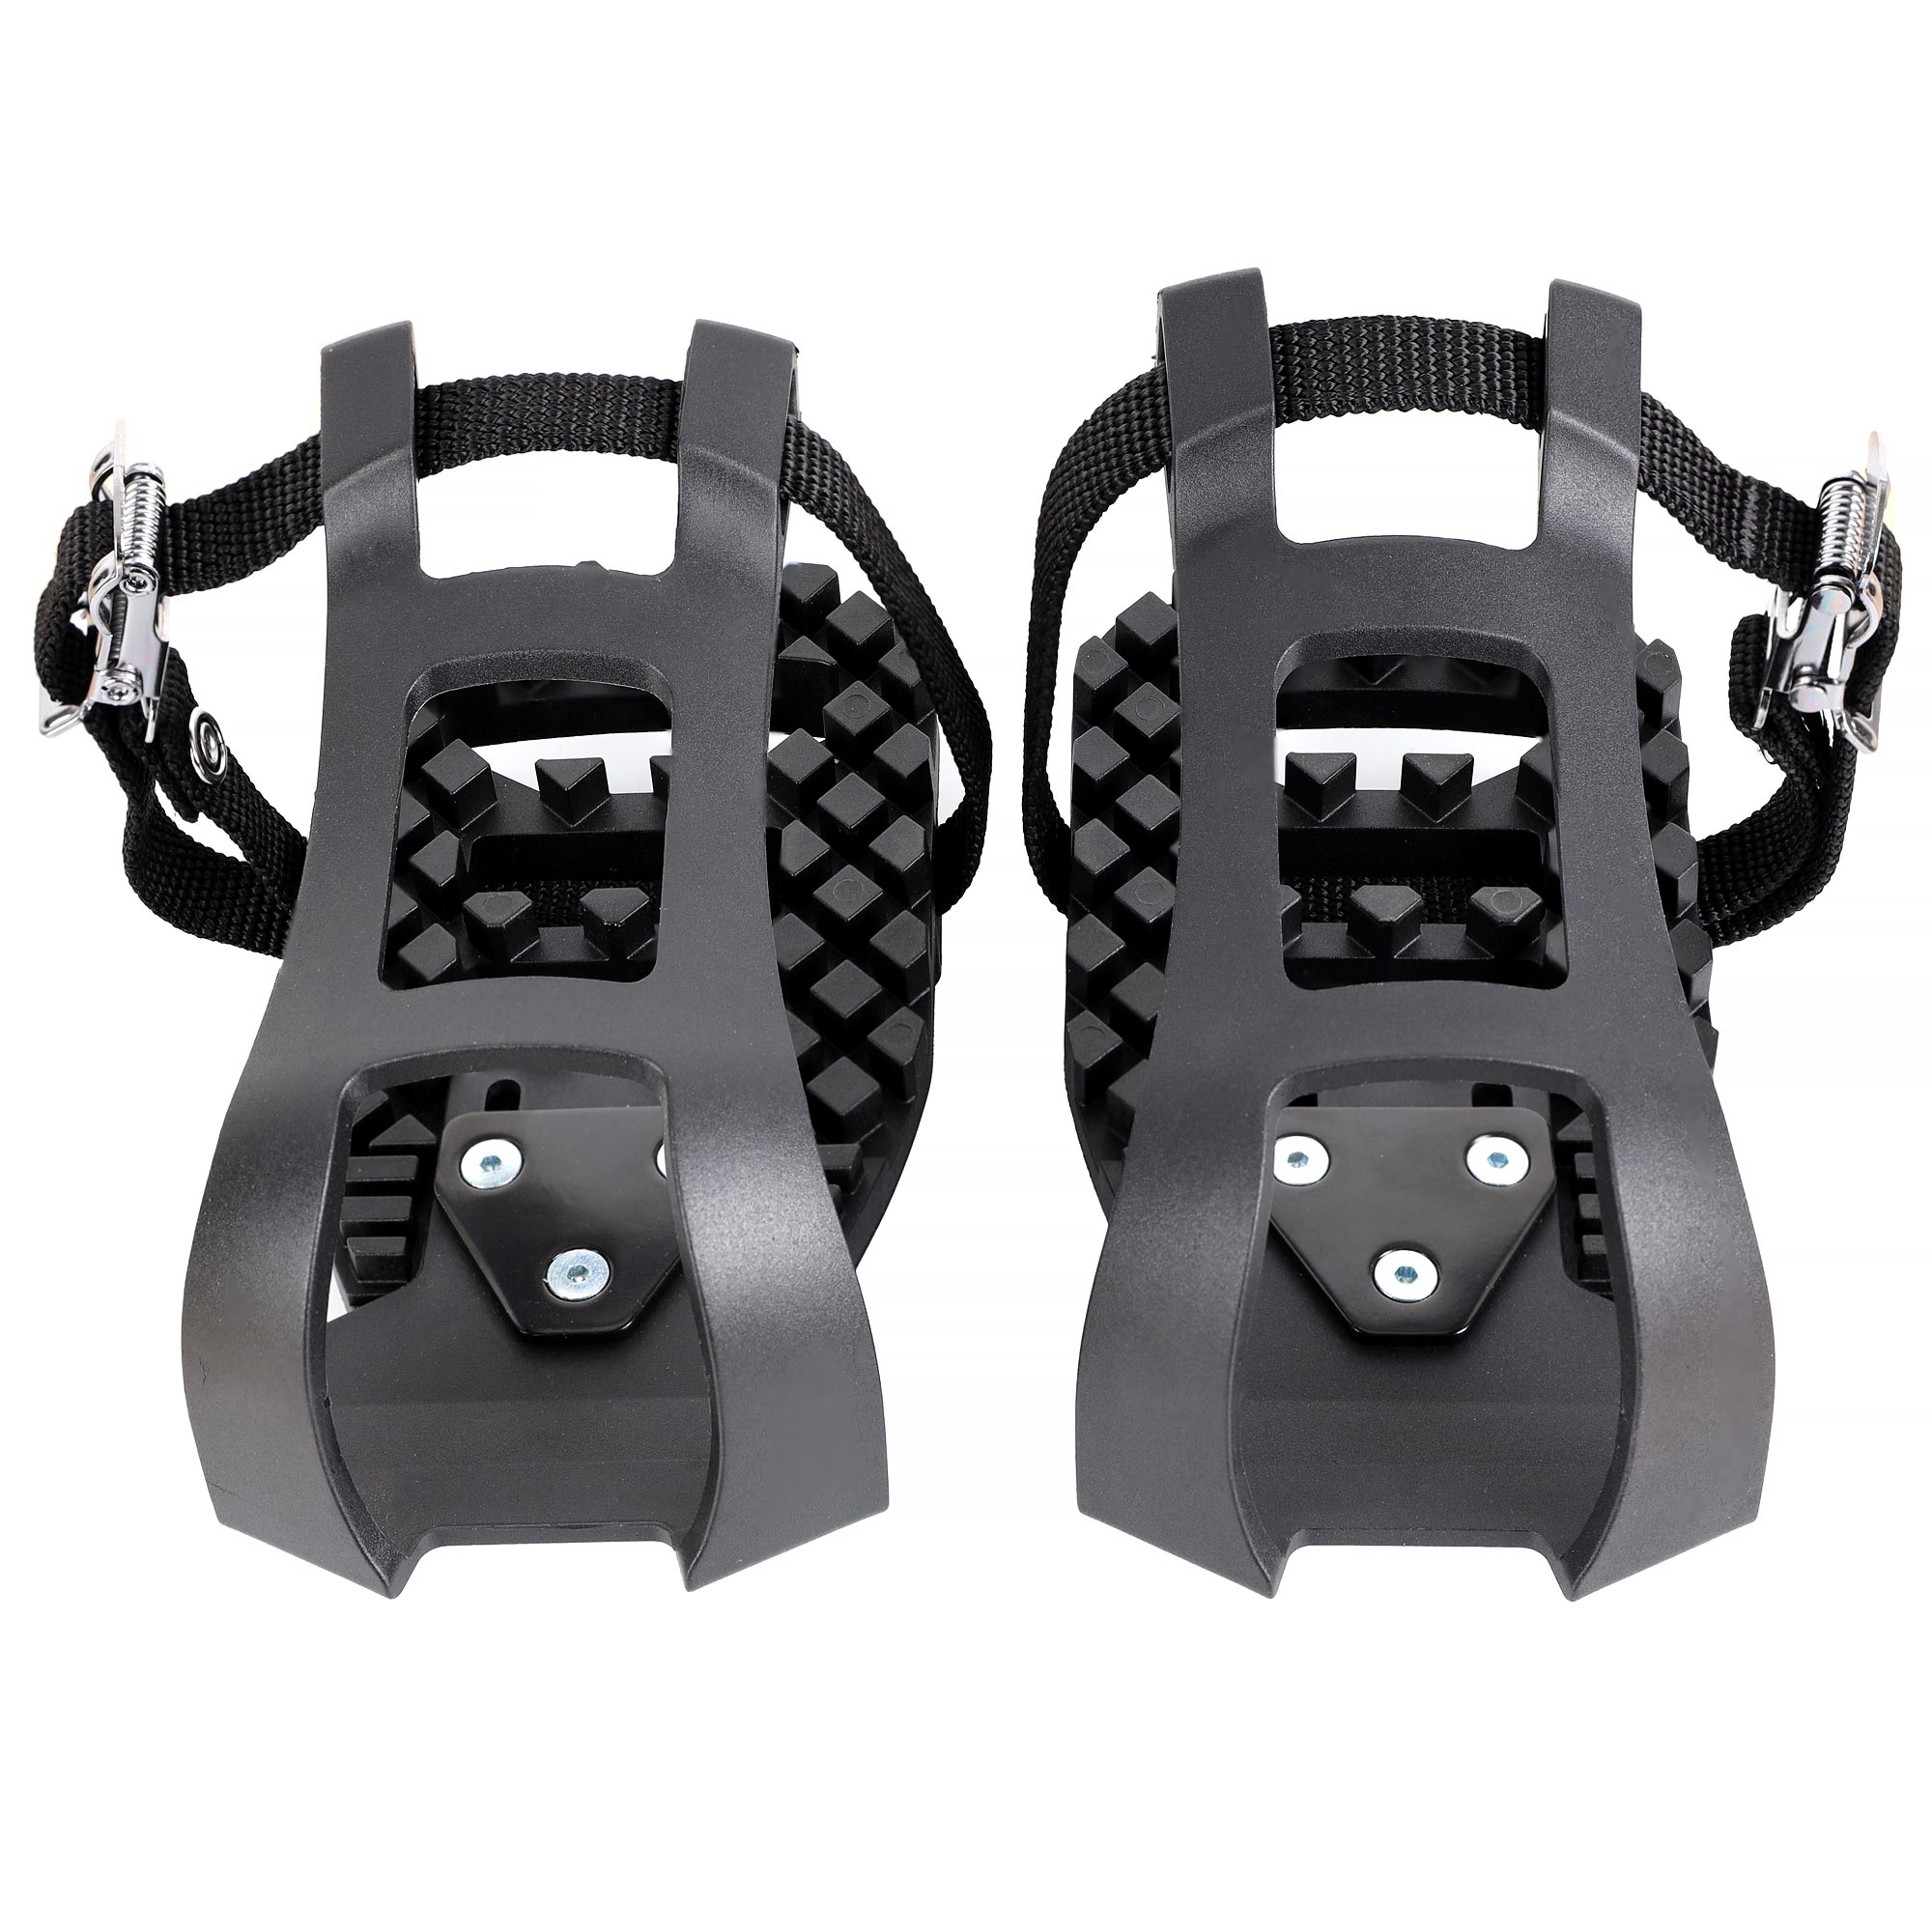 look delta pedals with cages